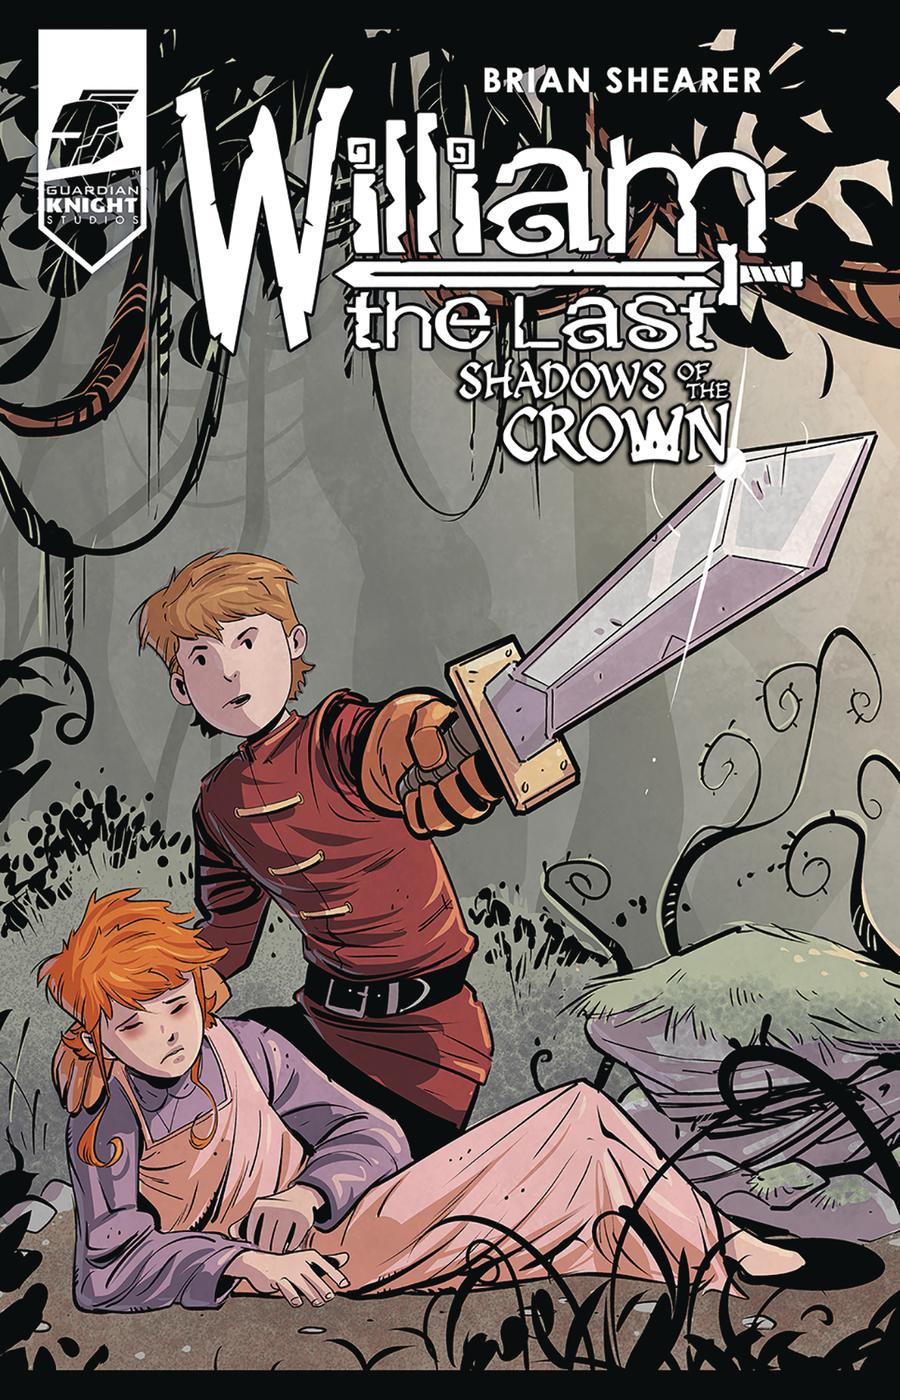 William The Last Shadows Of The Crown #3